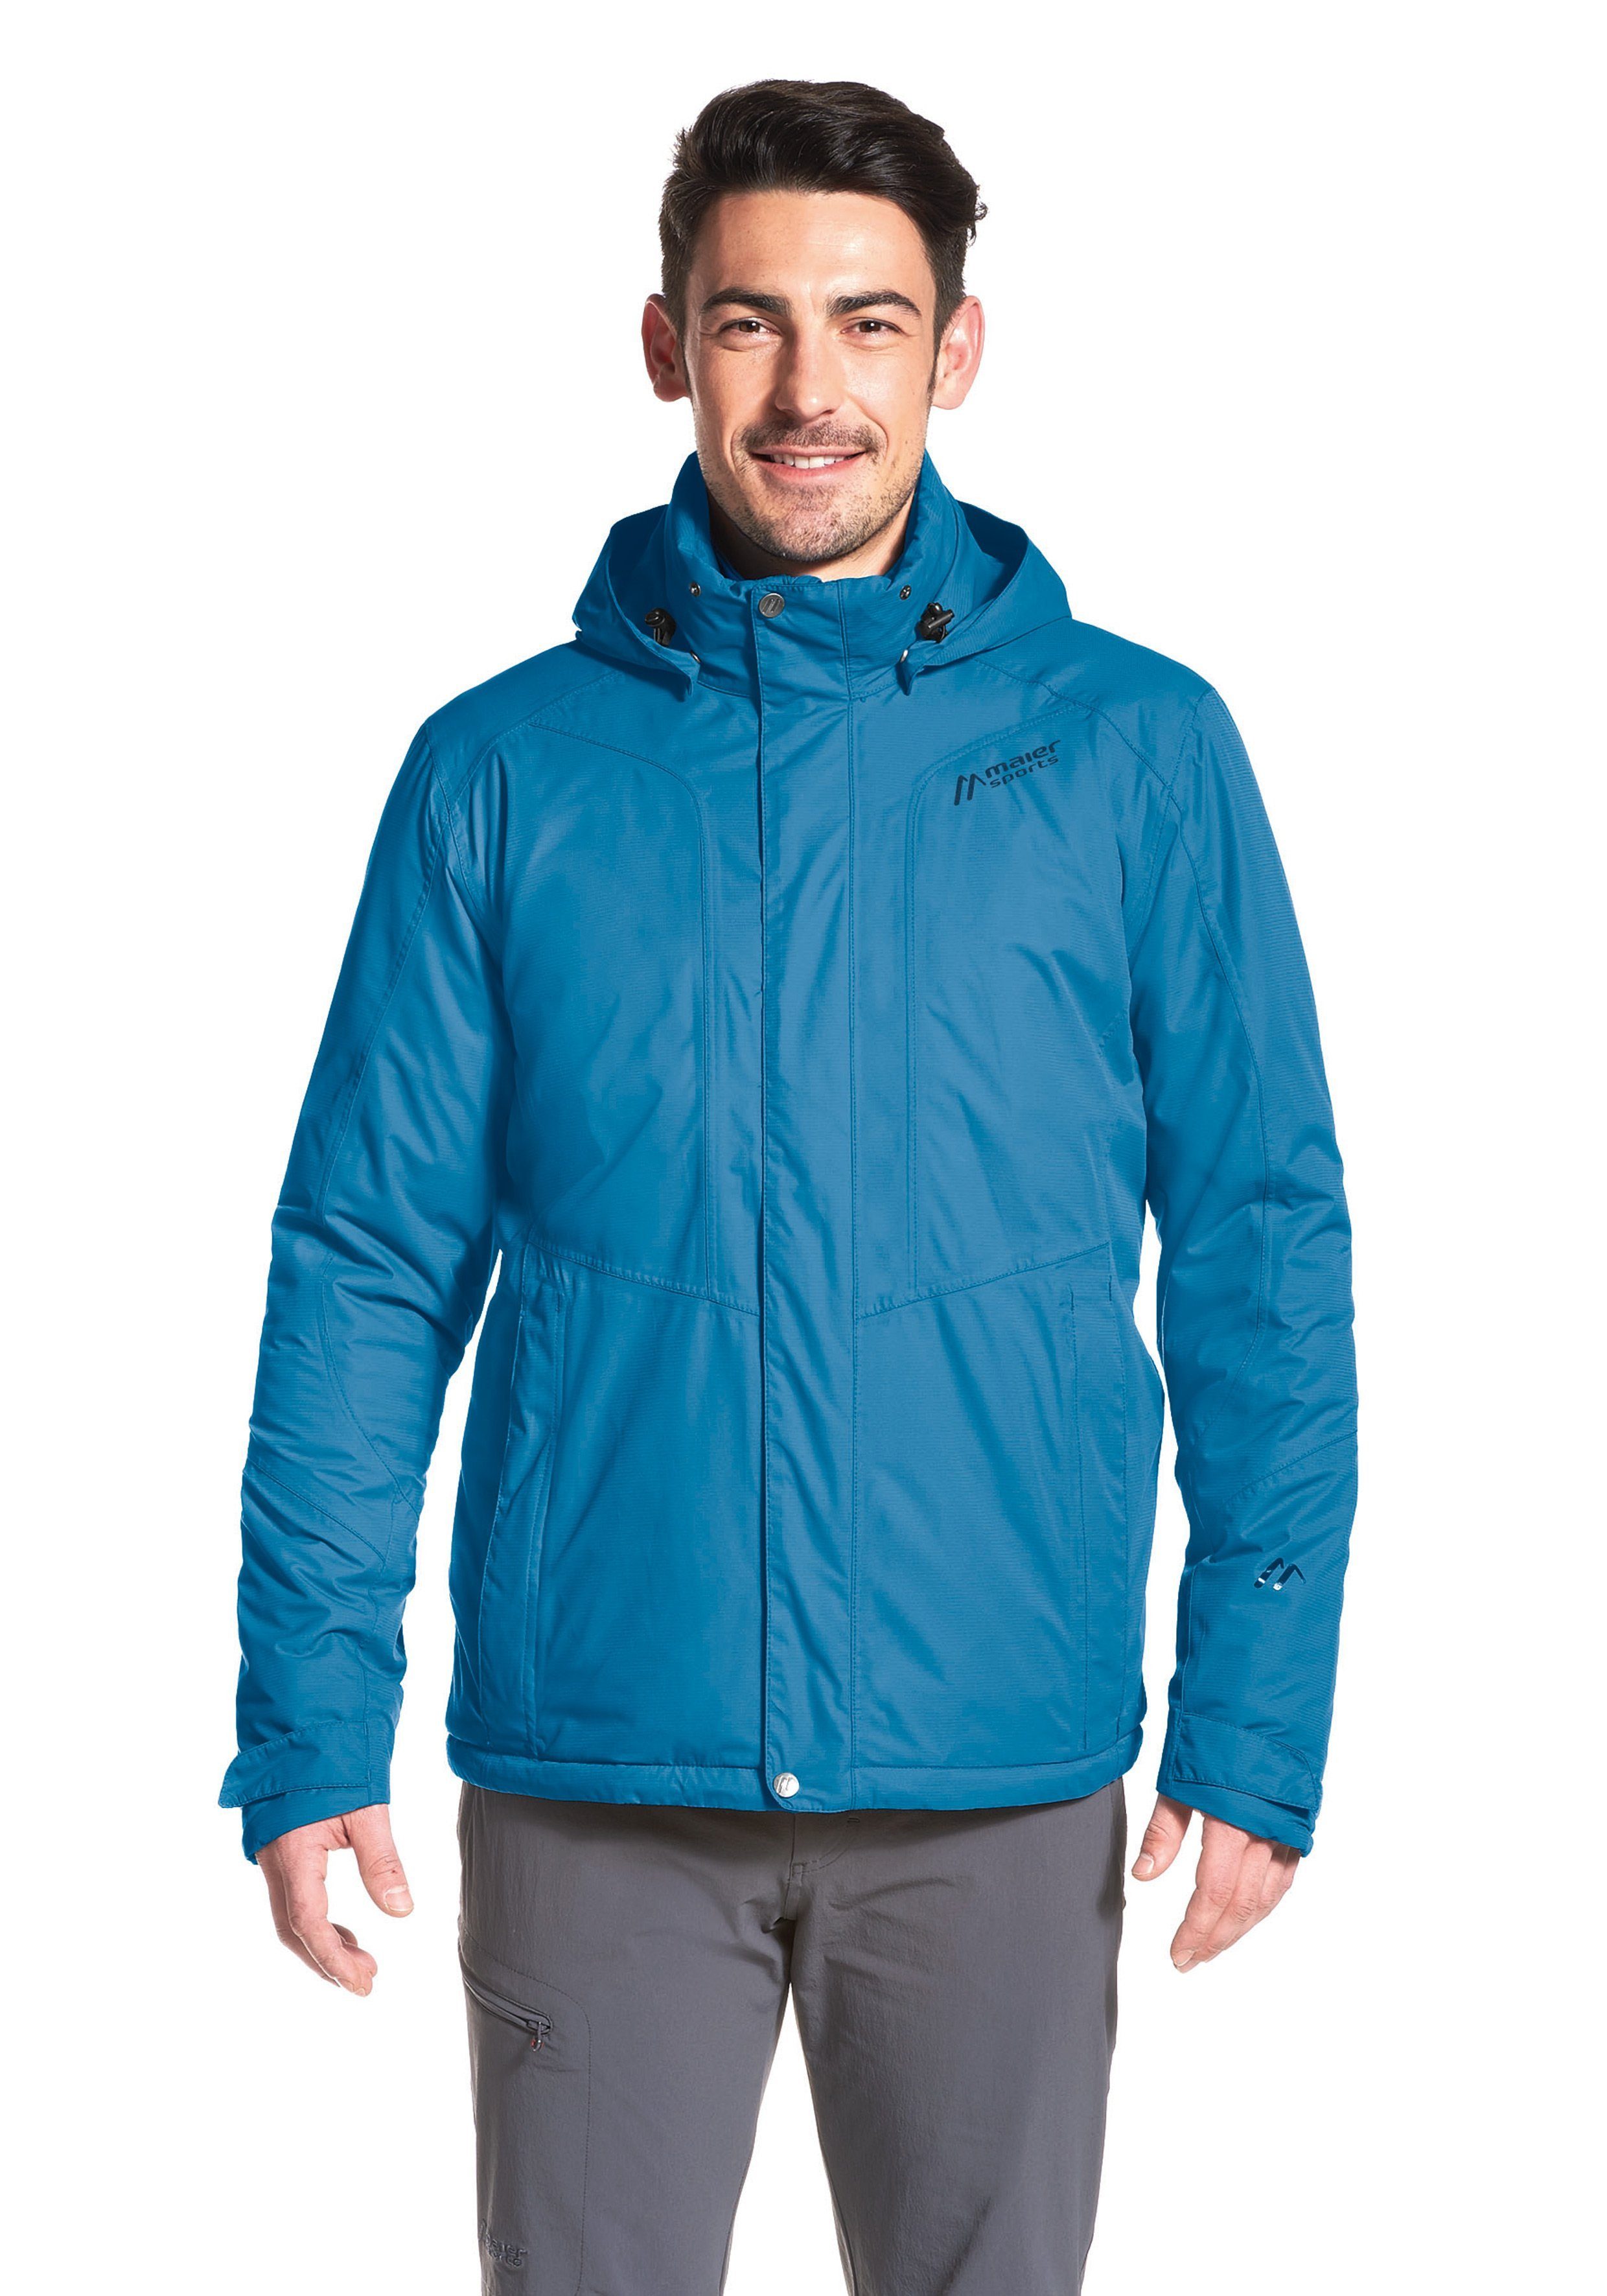 Otto - Maier Sports NU 15% KORTING: Maier Sports functionele jas Metor Therm M